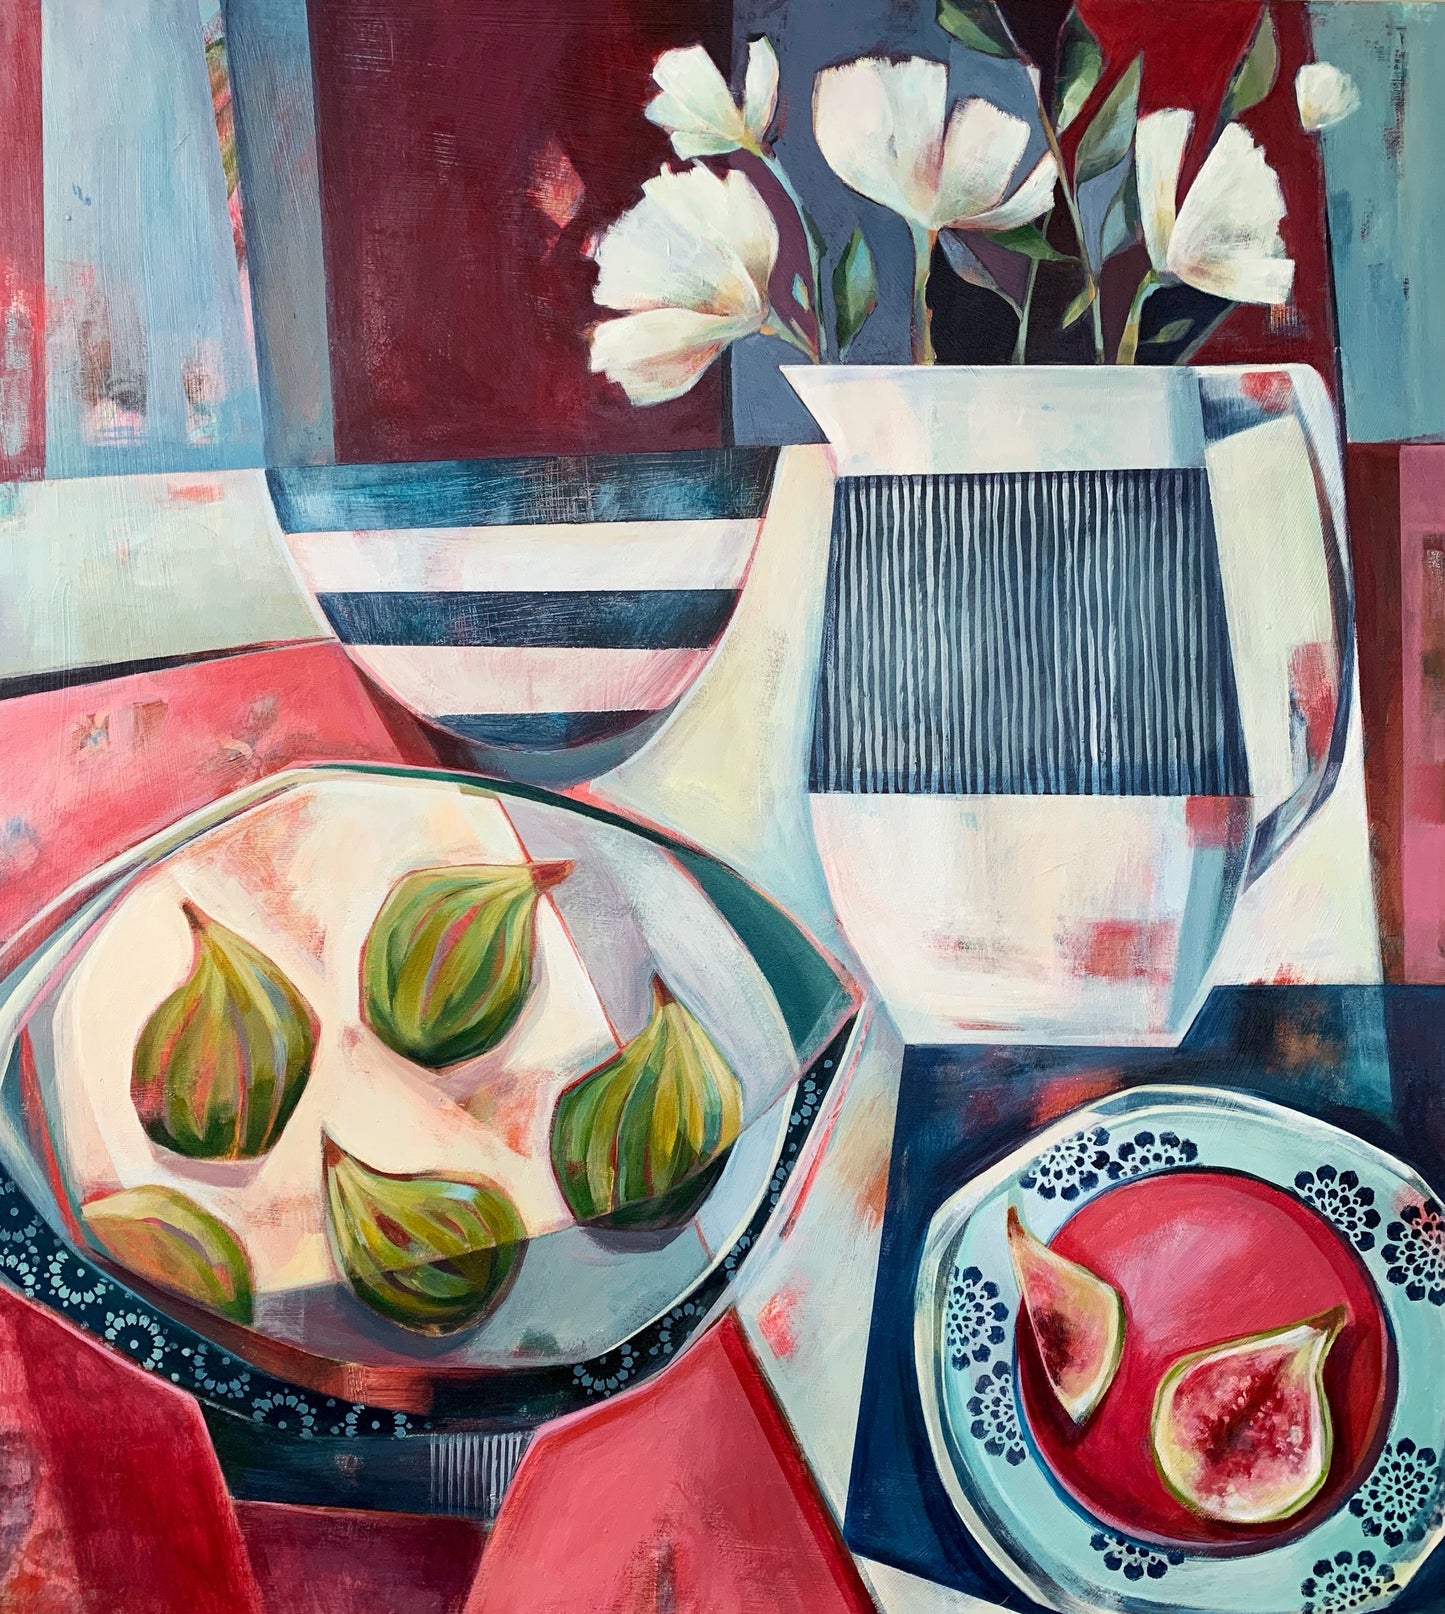 liza kavanagh original painting on board Tiger Figs and Anemones. a contemporary still life in shades of red and blue